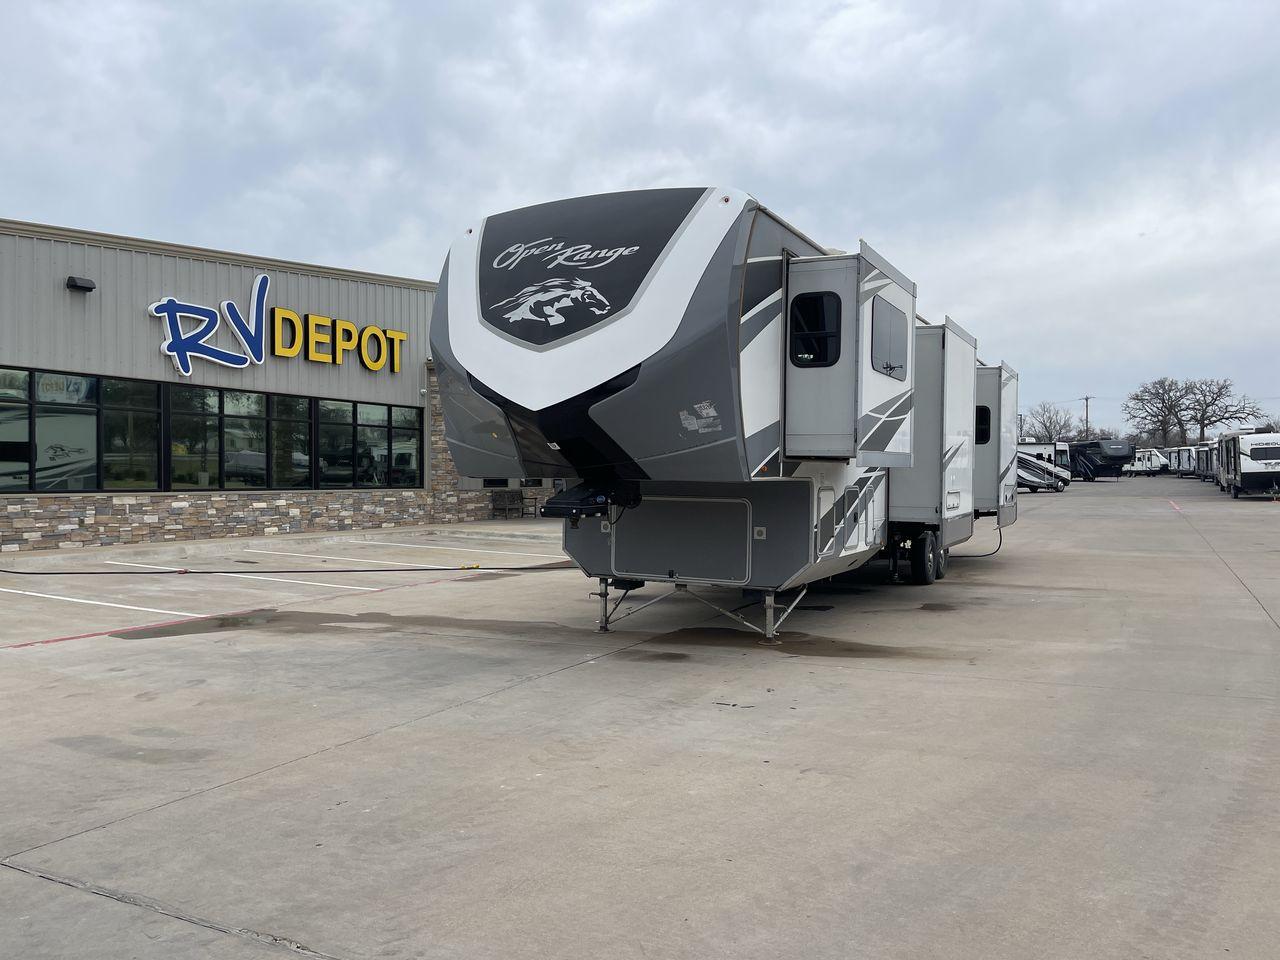 2018 HIGHLAND RIDGE OPEN RANGE 3X387RBS (58TCH0BVXJ3) , Length: 41.5 ft. | Dry Weight: 13,320 lbs. | Gross Weight: 16,470 lbs. | Slides: 5 transmission, located at 4319 N Main Street, Cleburne, TX, 76033, (817) 221-0660, 32.435829, -97.384178 - This impressive model spans 41.5 feet in length and boasts a substantial GVWR of 16,470 lbs, ensuring both durability and stability on the road. Crafted with precision and attention to detail, the Open Range 3X387RBS features a robust aluminum frame and fiberglass sidewalls, promising years of relia - Photo #0